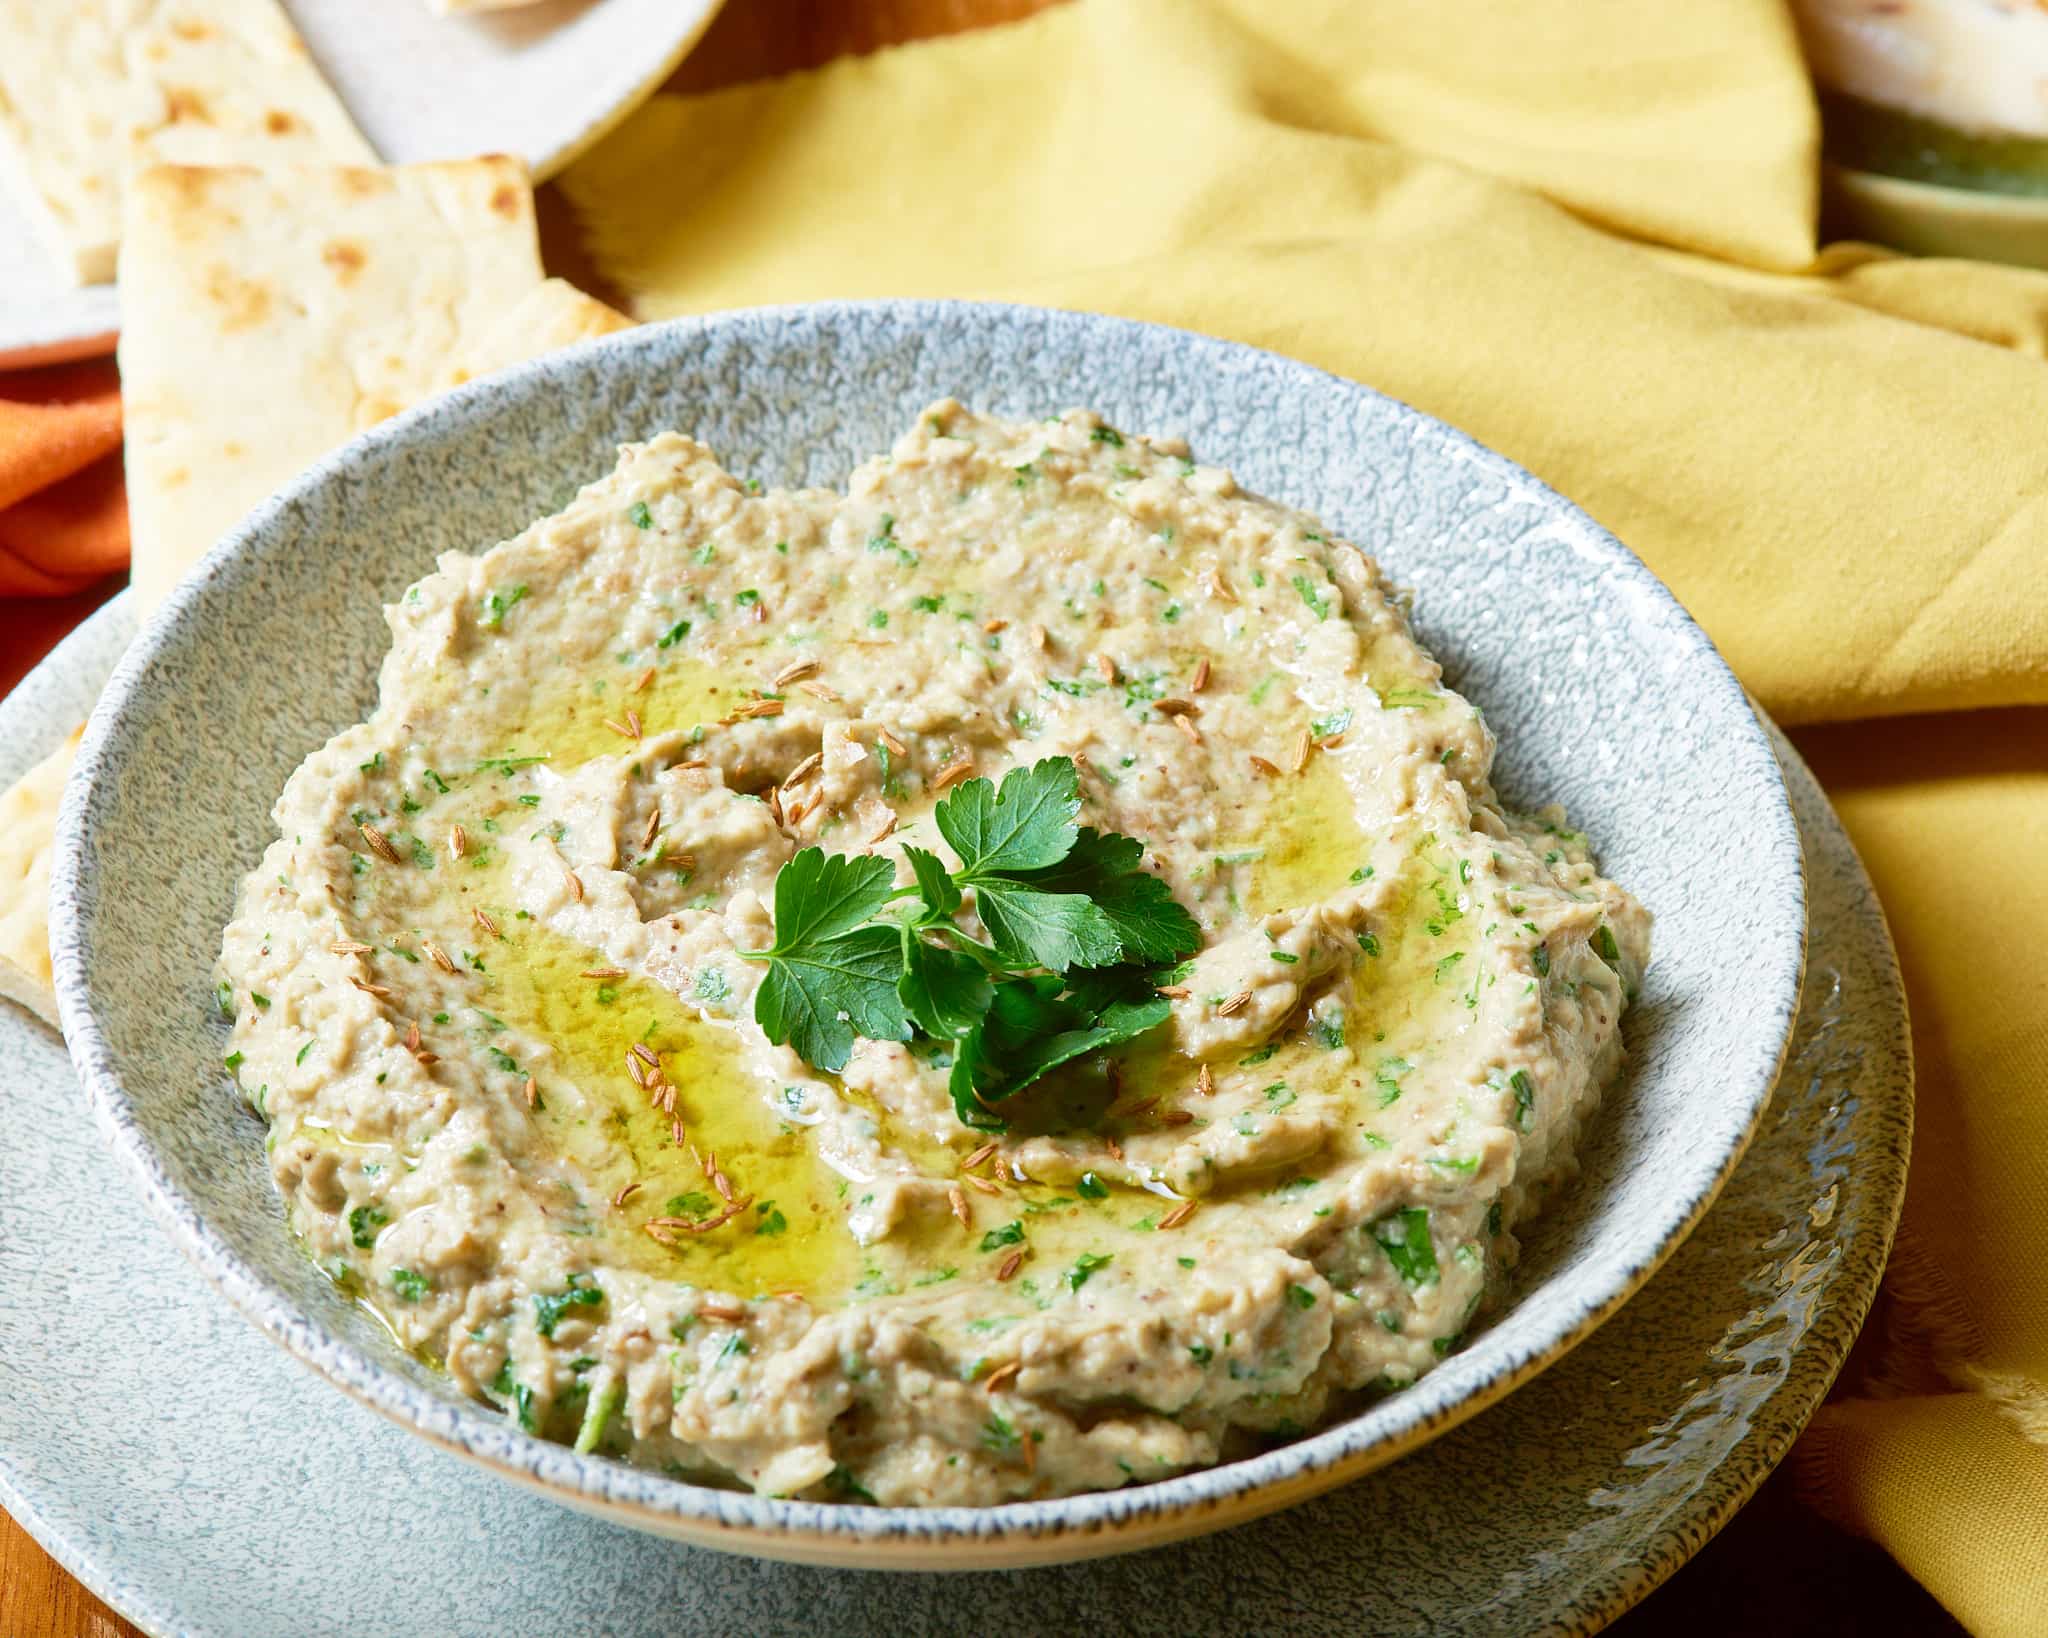 A delicious and fresh baba ganoush dip topped with parsley in a mottled grey serving dish.